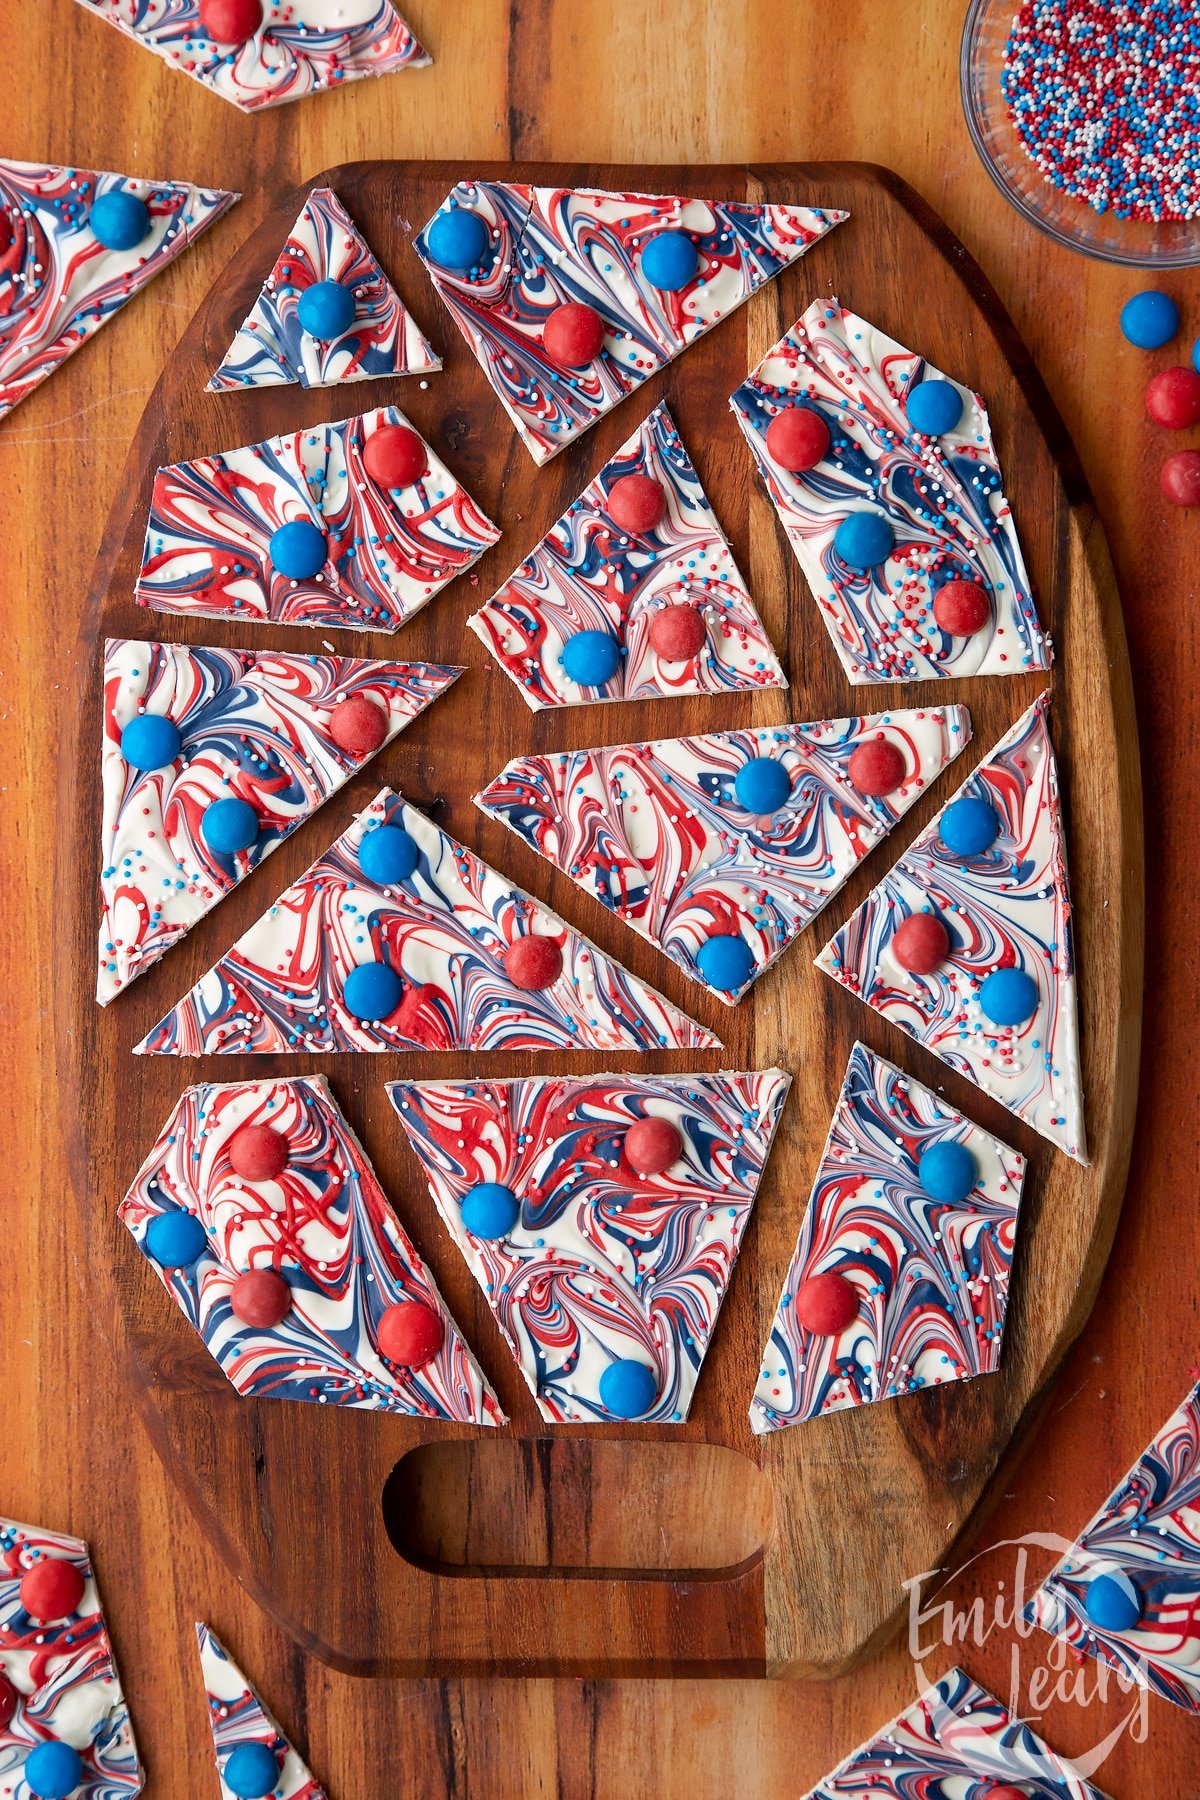 Finished red, white and blue bark served on a decorative wooden board.